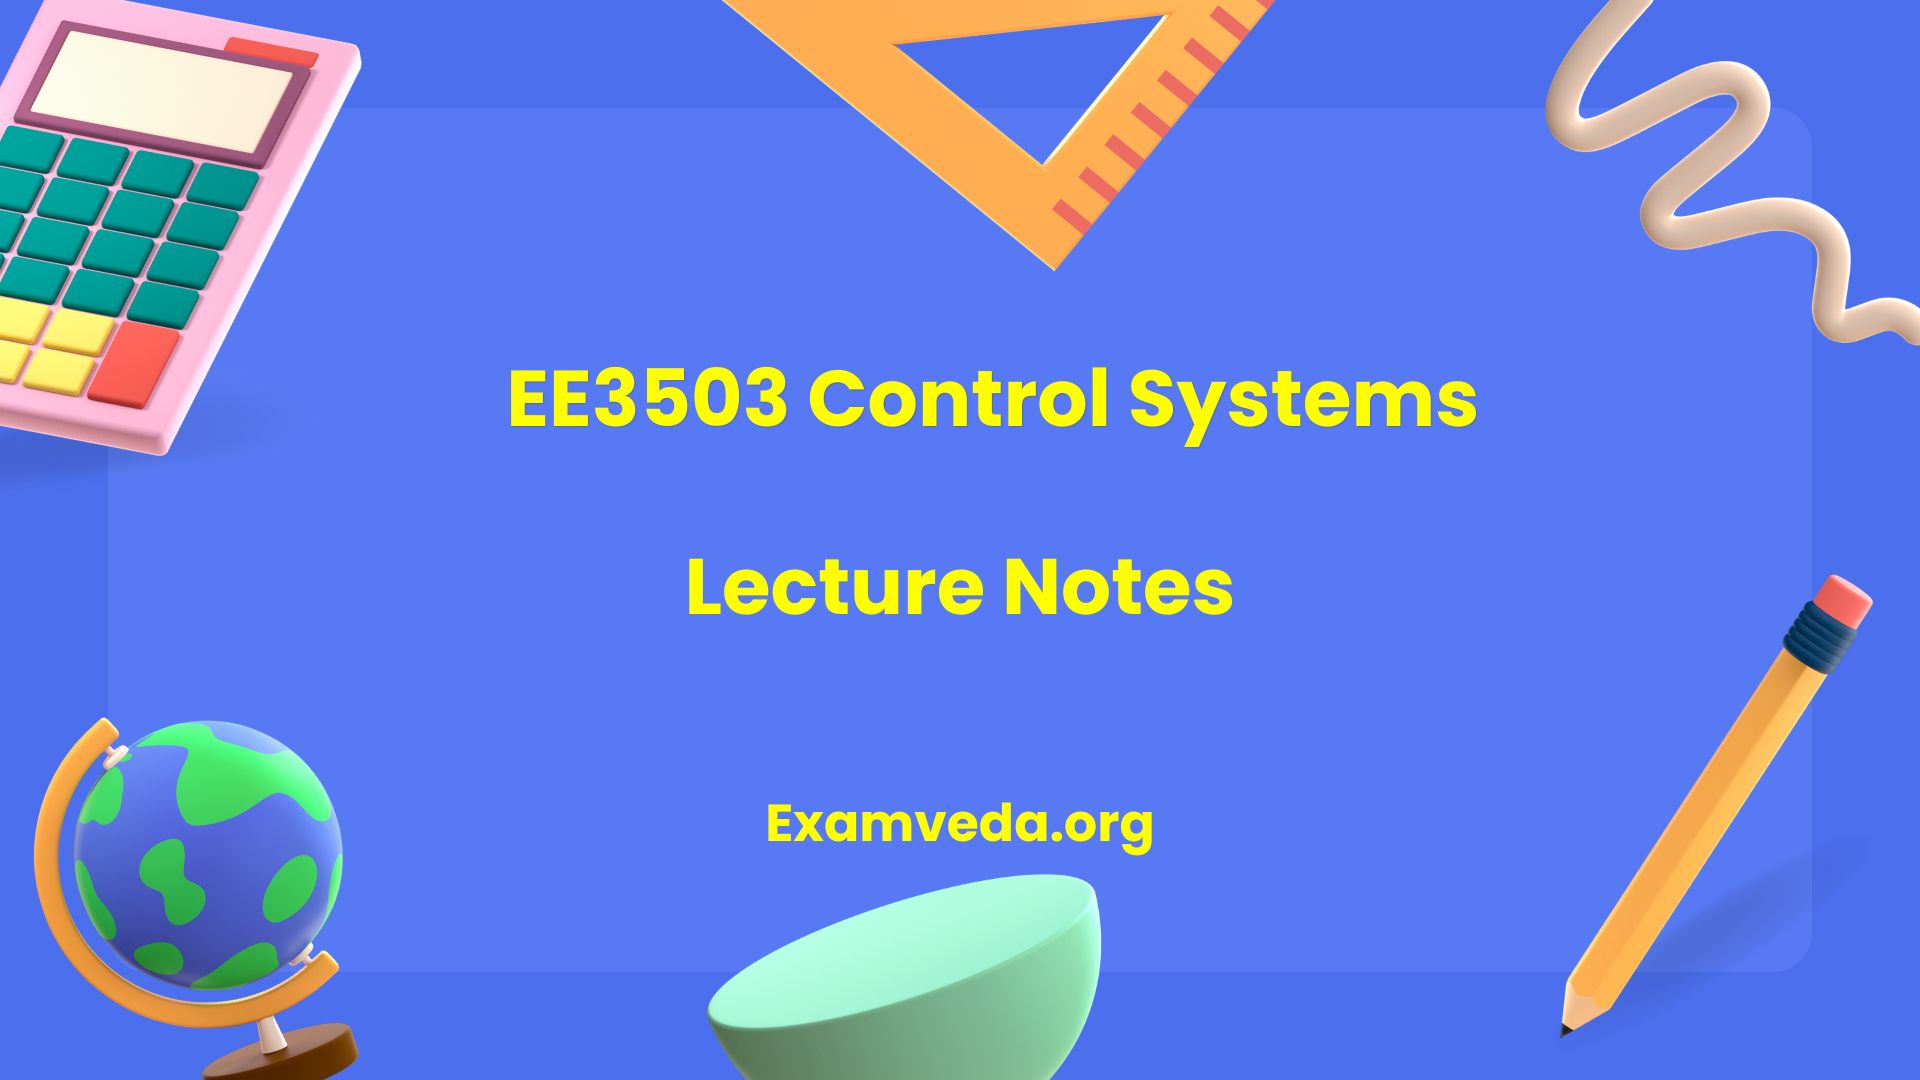 EE3503 Control Systems Lecture Notes